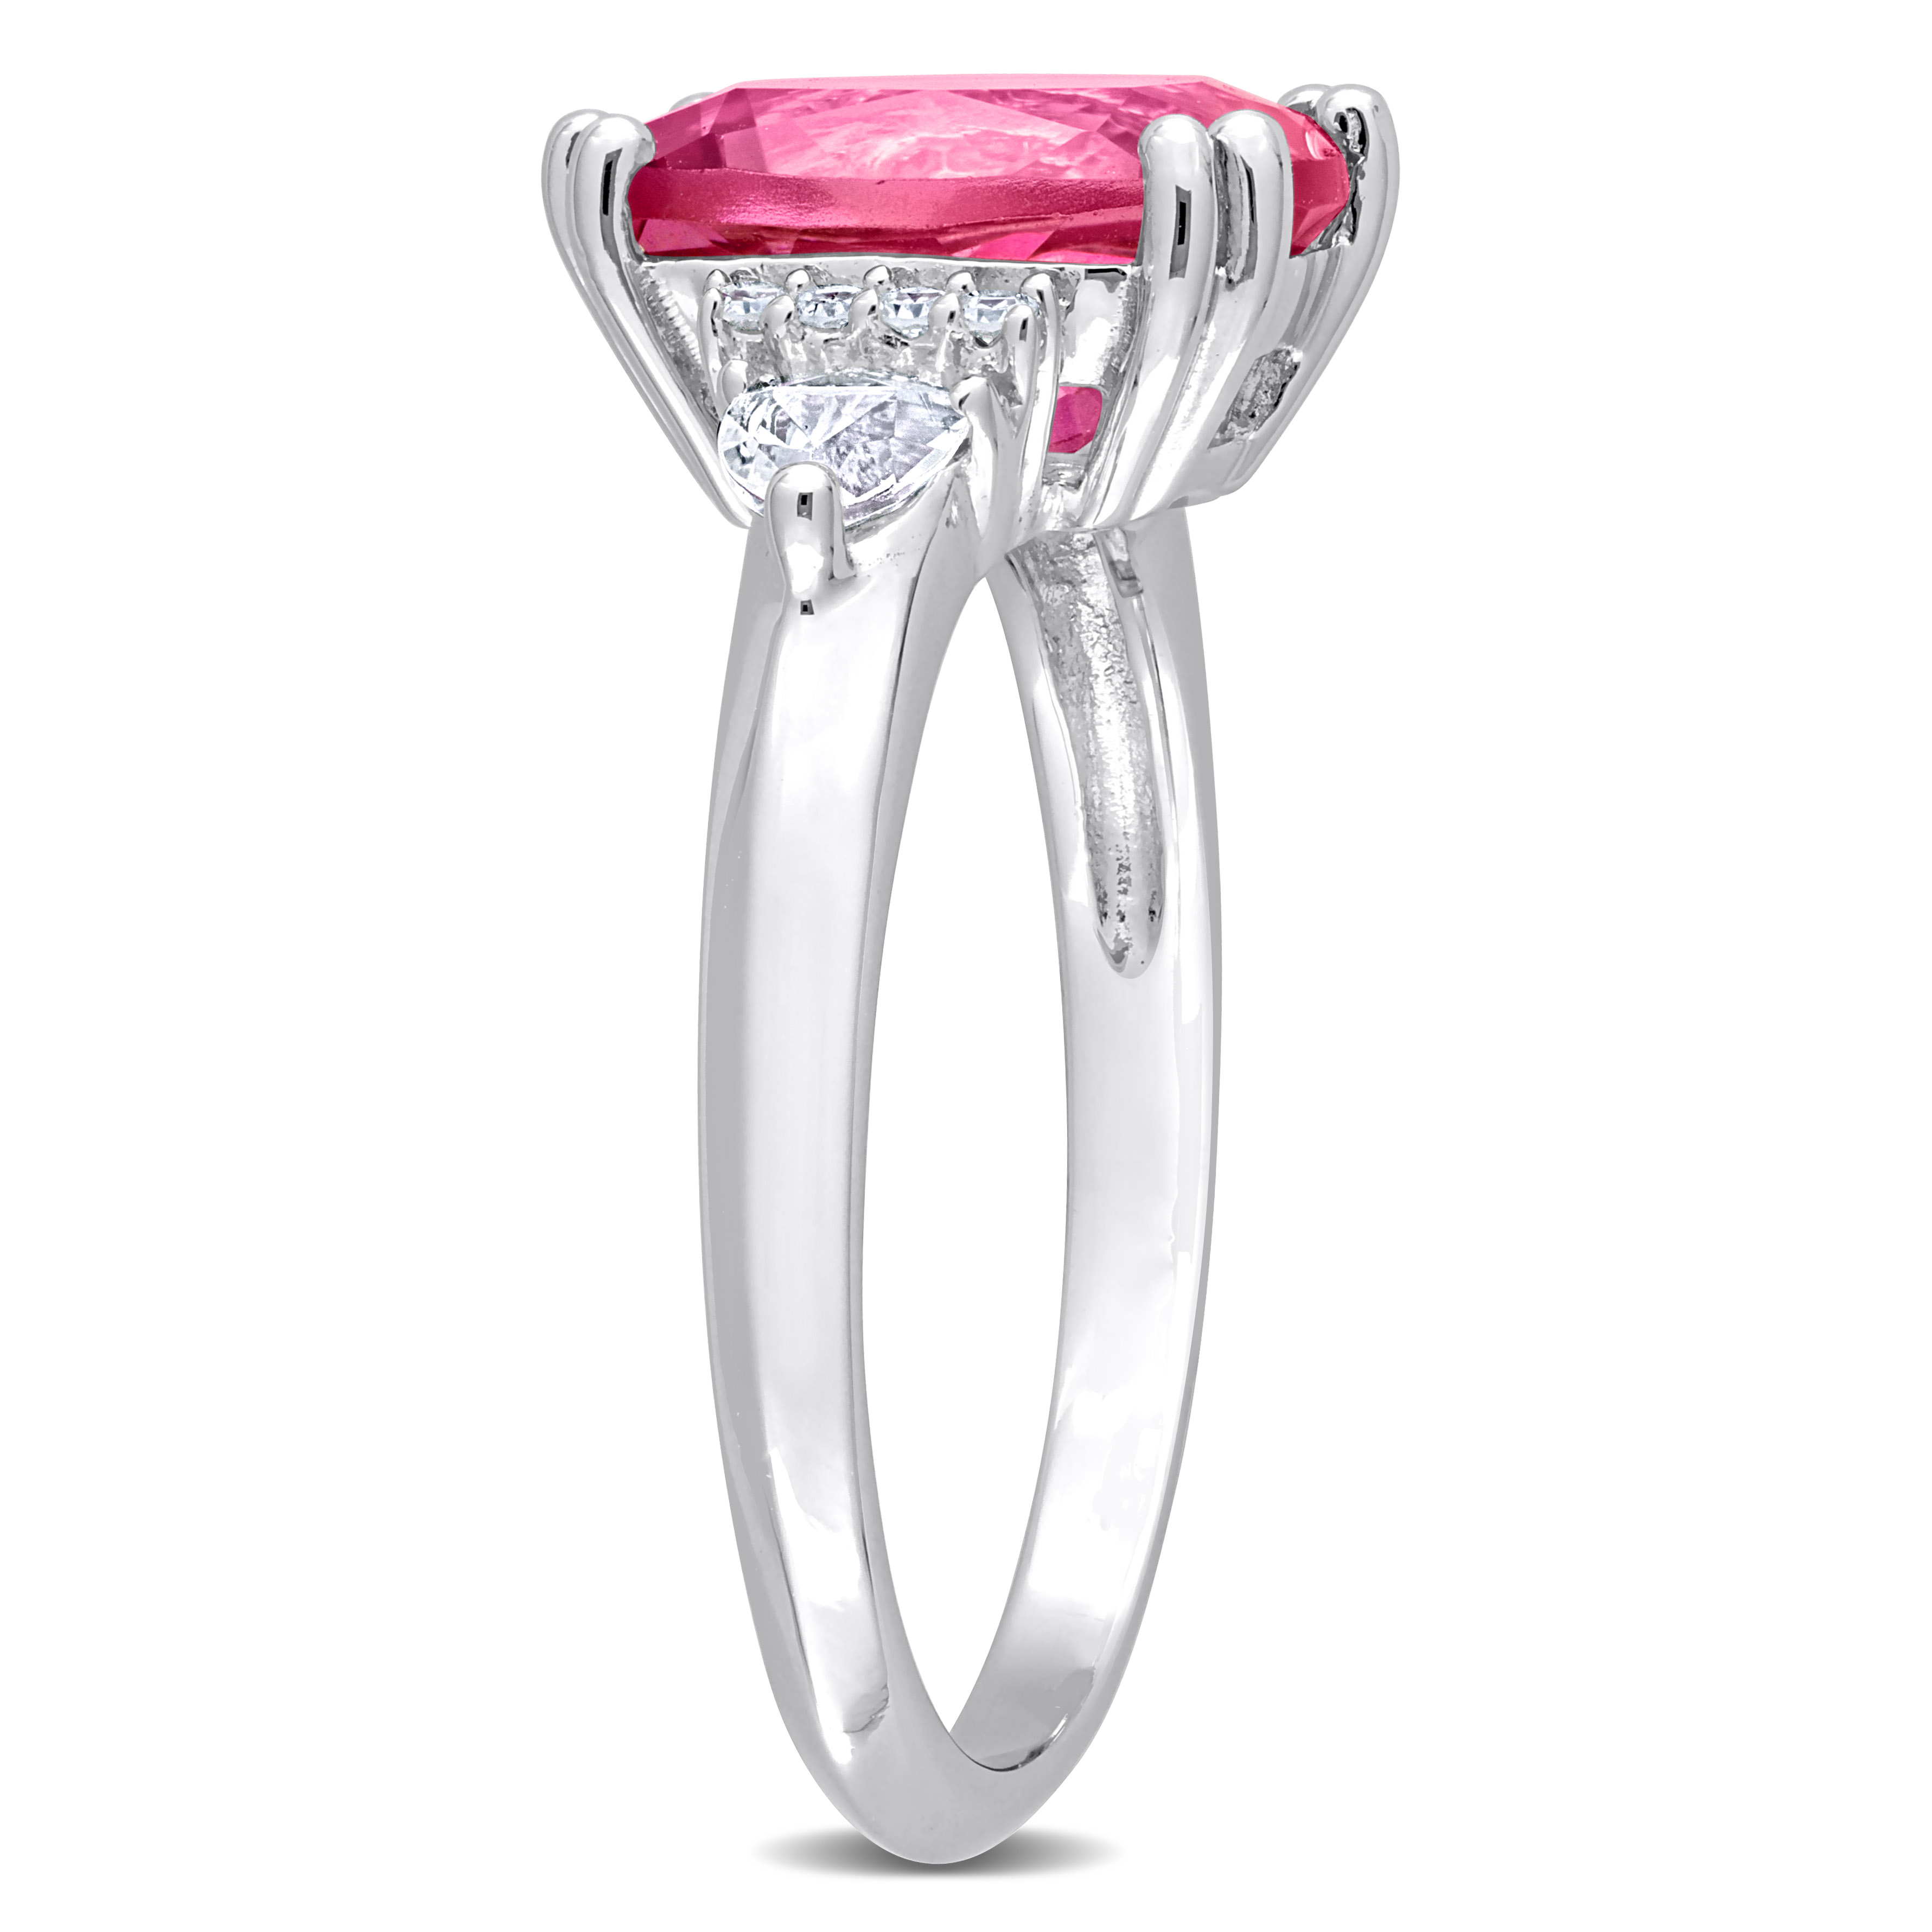 4 1/2 CT TGW Octagon-Cut Pink Topaz & TrilliantCut White Topaz Diamond Accent 3-Stone Ring in Sterling Silver